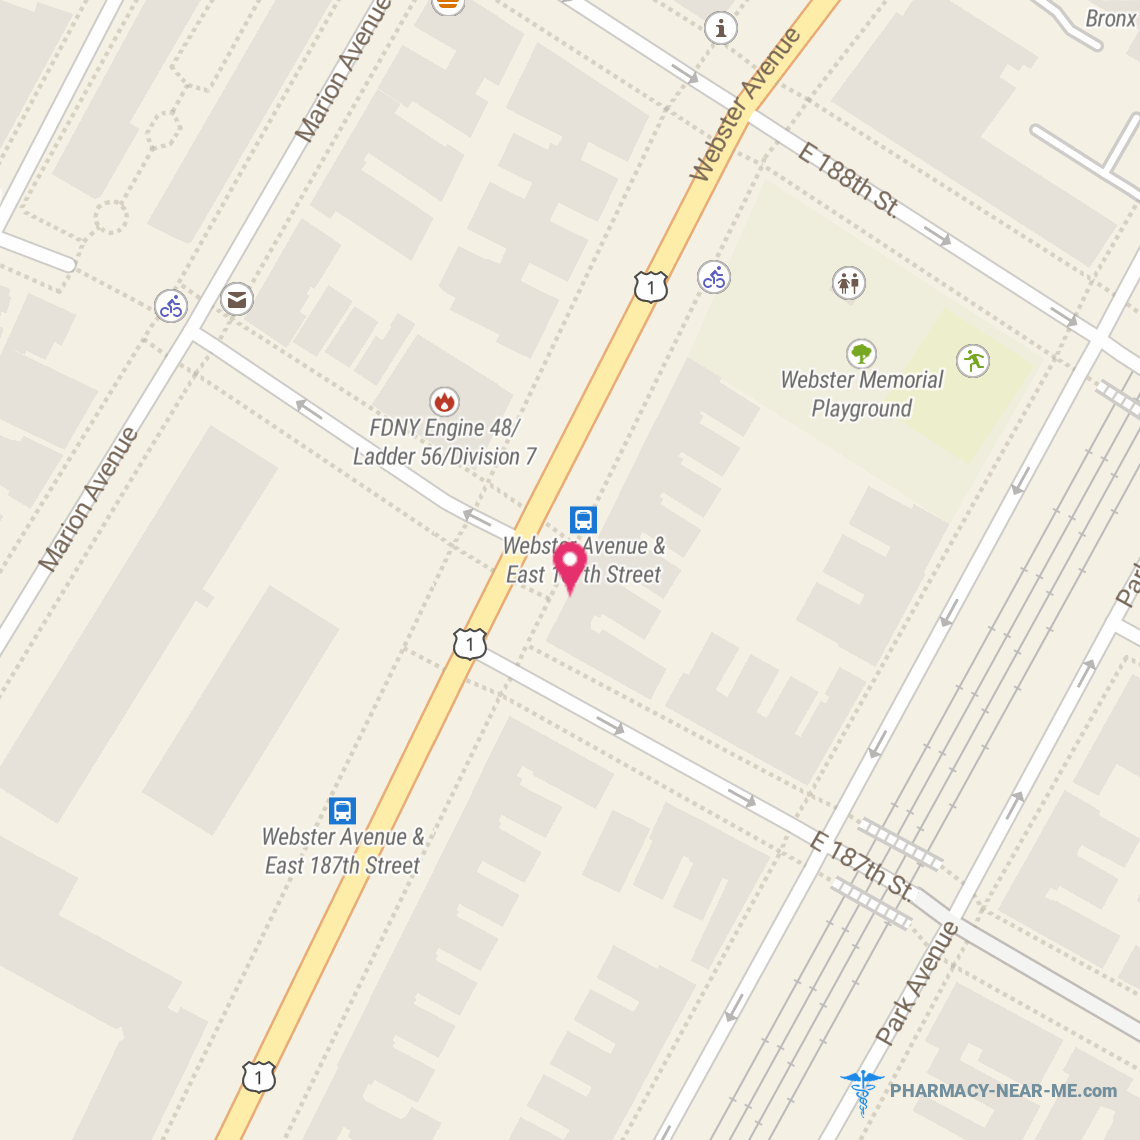 NEW GMA INC - Pharmacy Hours, Phone, Reviews & Information: 2404 Webster Avenue, Bronx, New York 10458, United States